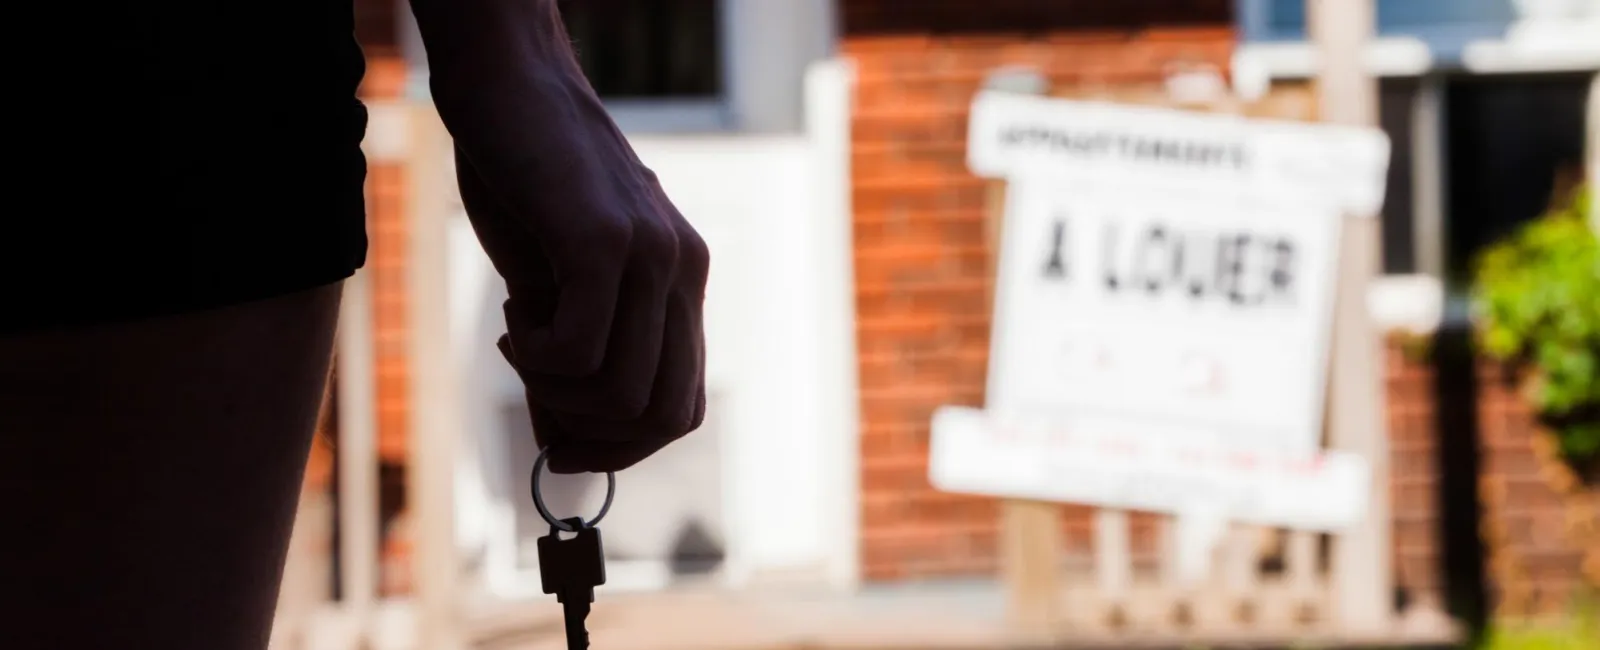 How to Secure Your Rental Property